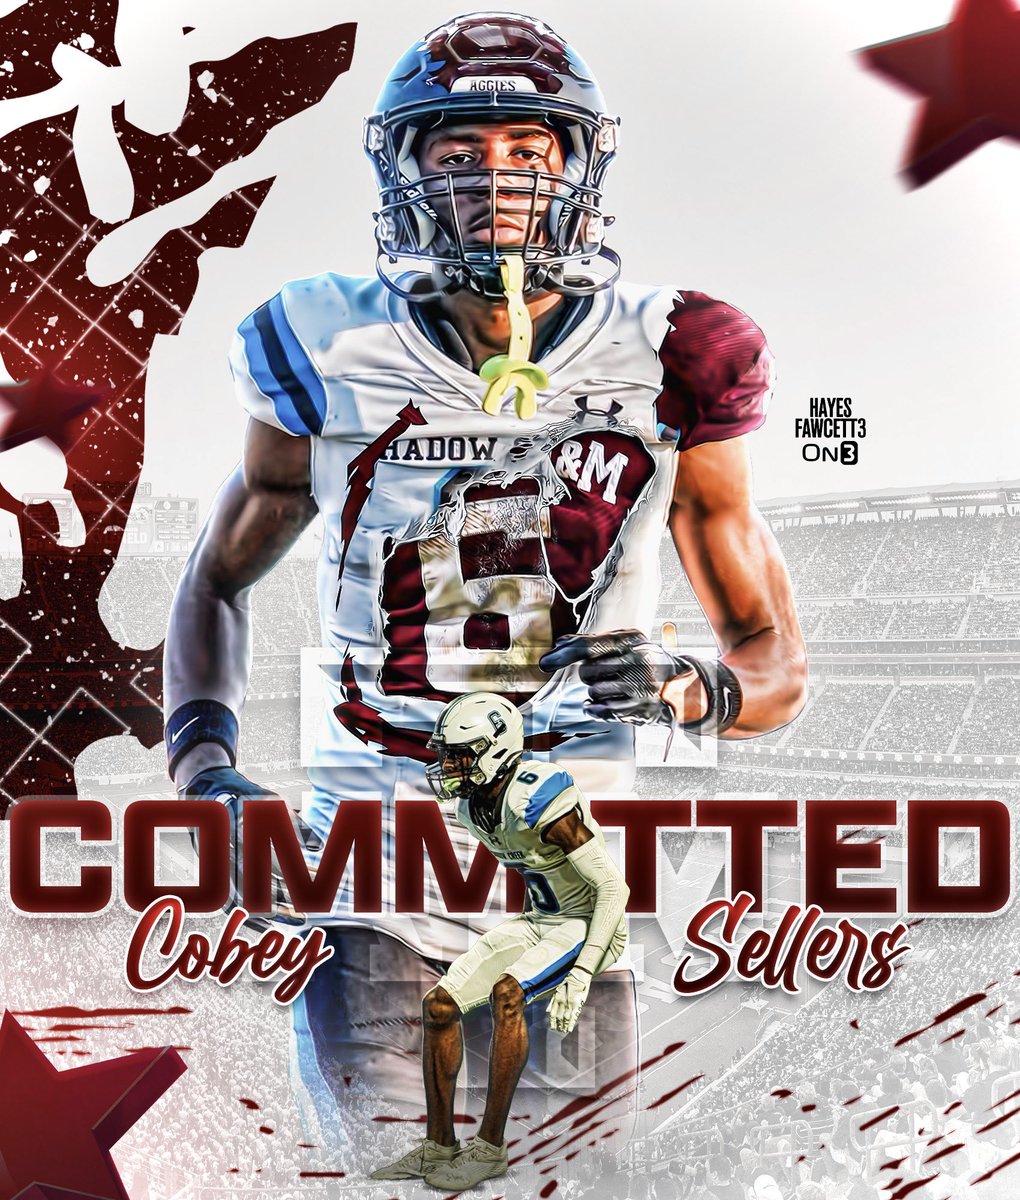 BREAKING: Four-Star CB Cobey Sellers has Committed to Texas A&M, he tells me for @on3recruits The 6’0 173 CB from Pearland, TX chose the Aggies over Texas and Oklahoma “Aggie Nation, I’m coming” on3.com/db/cobey-selle…